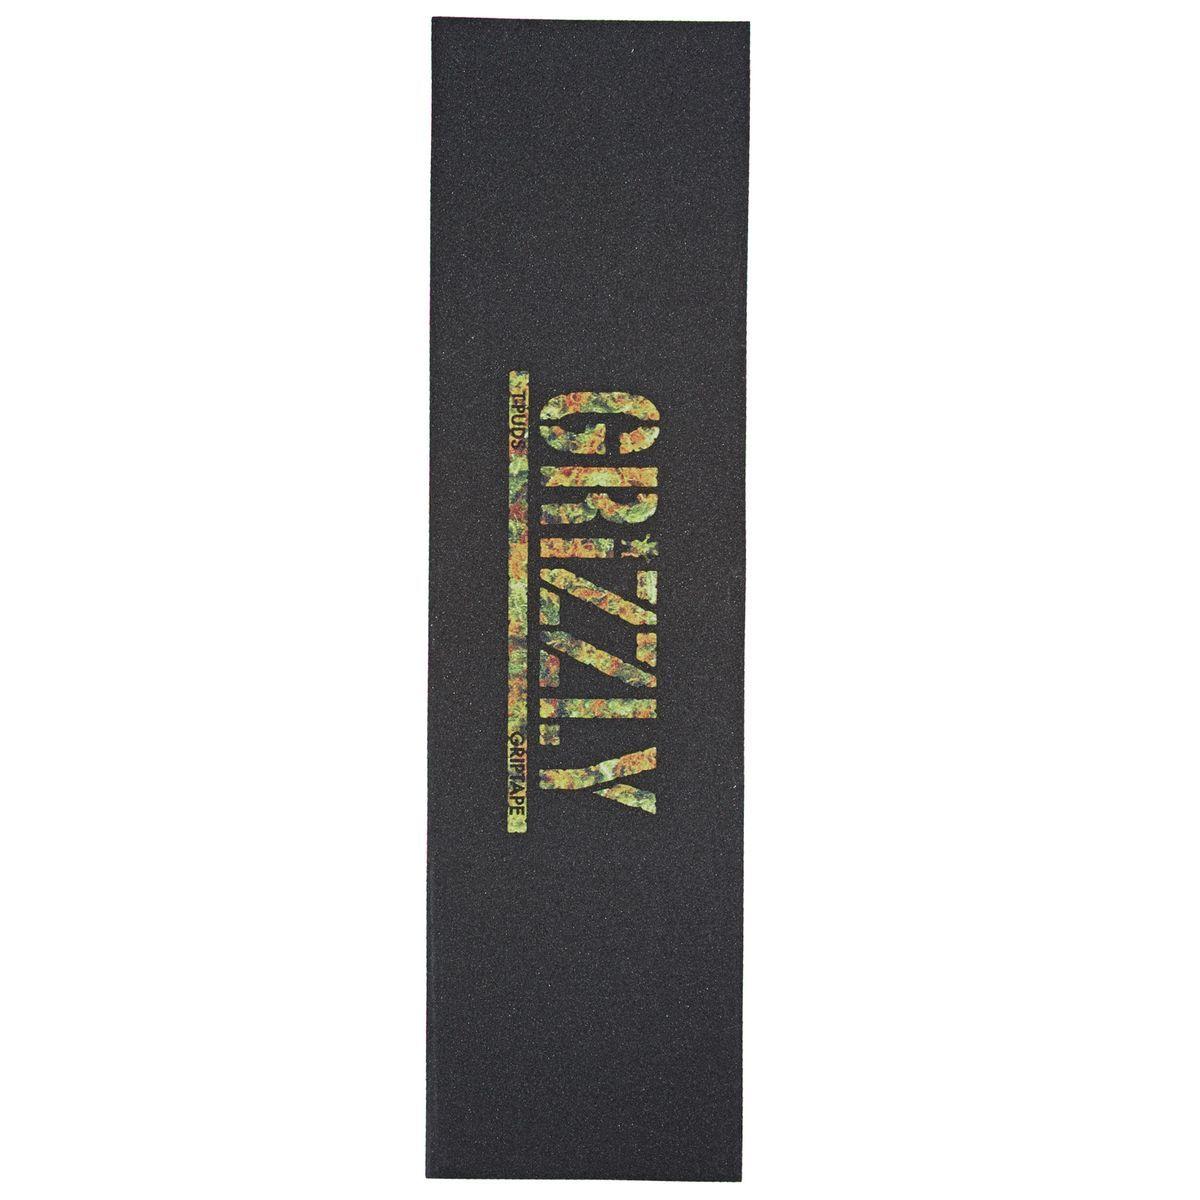 Grizzly Print Logo - Grizzly Stamp Print Griptape - Camo | Free UK Delivery* on All Orders